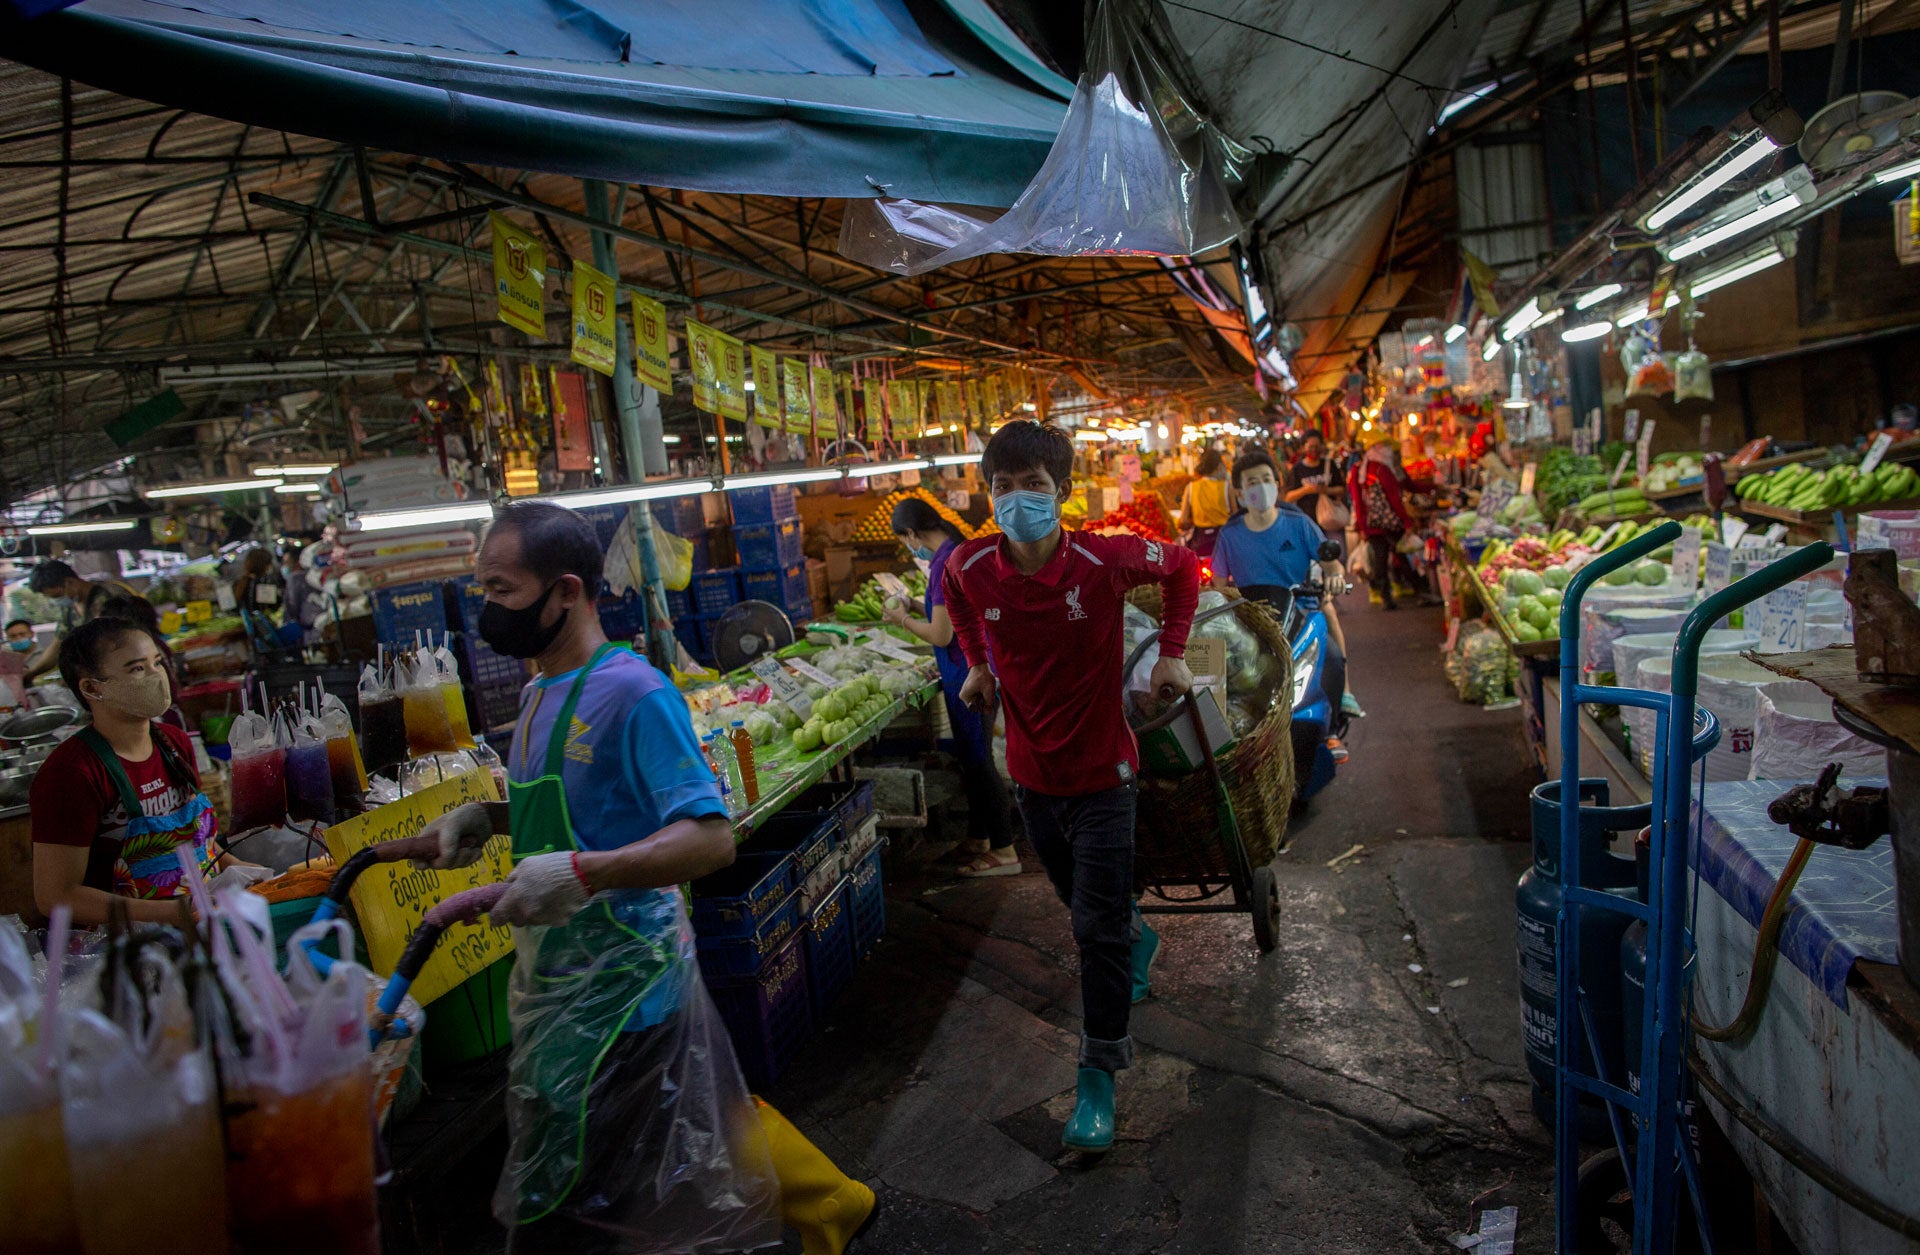 People in protective face masks pull carts through a narrow alley in a fresh market in Bangkok, Thailand, April 9, 2020.